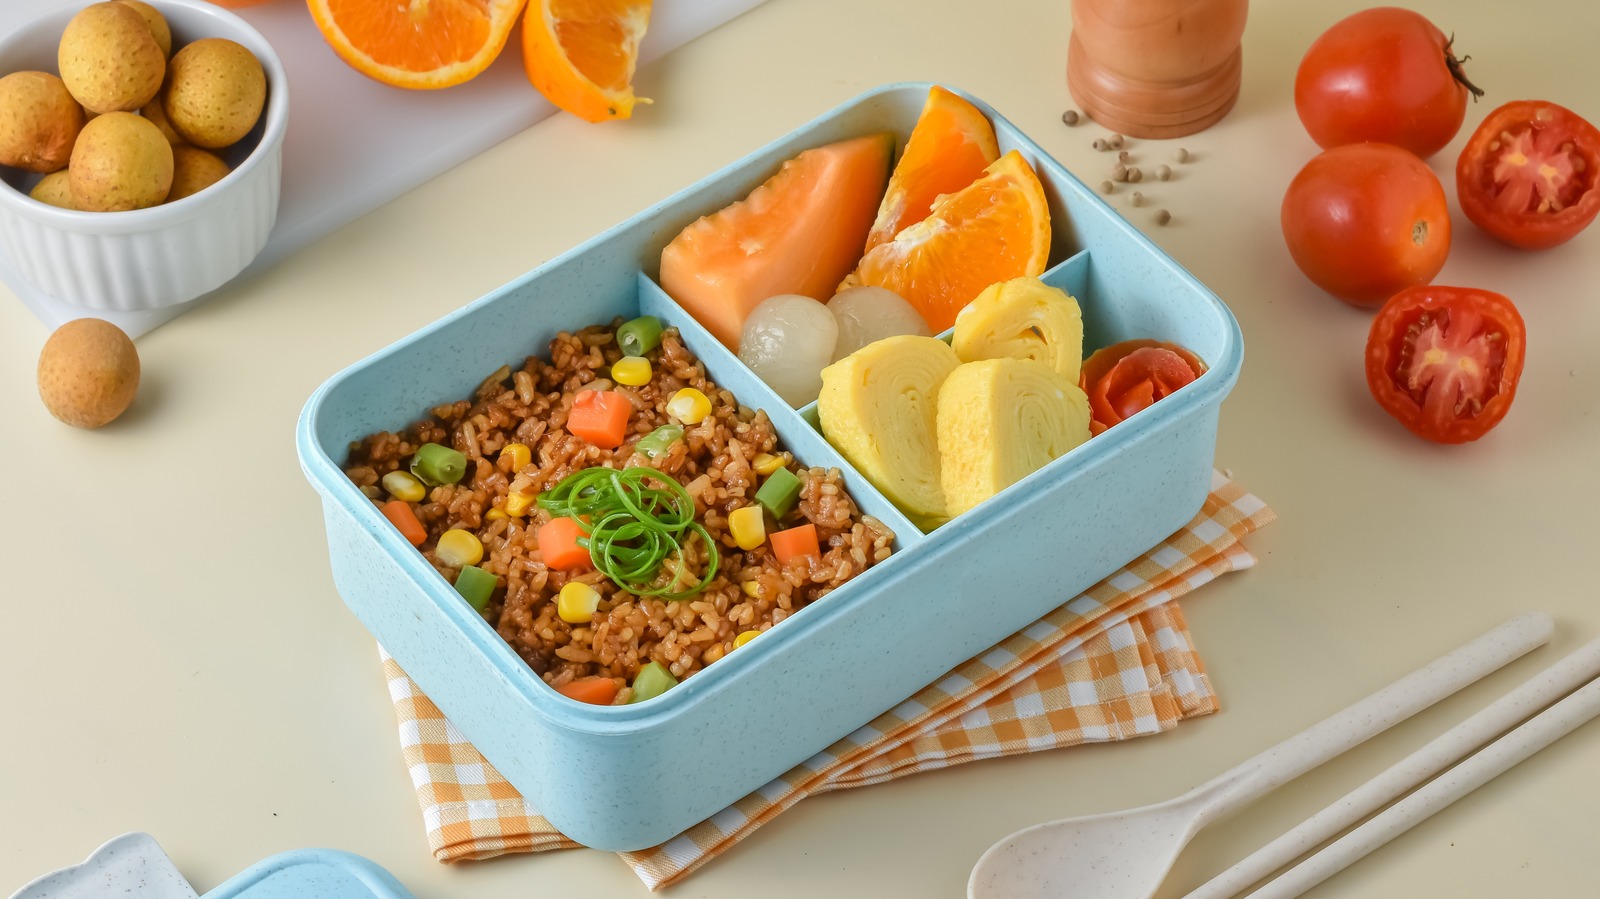 The Best Bento Boxes To Buy In 2022